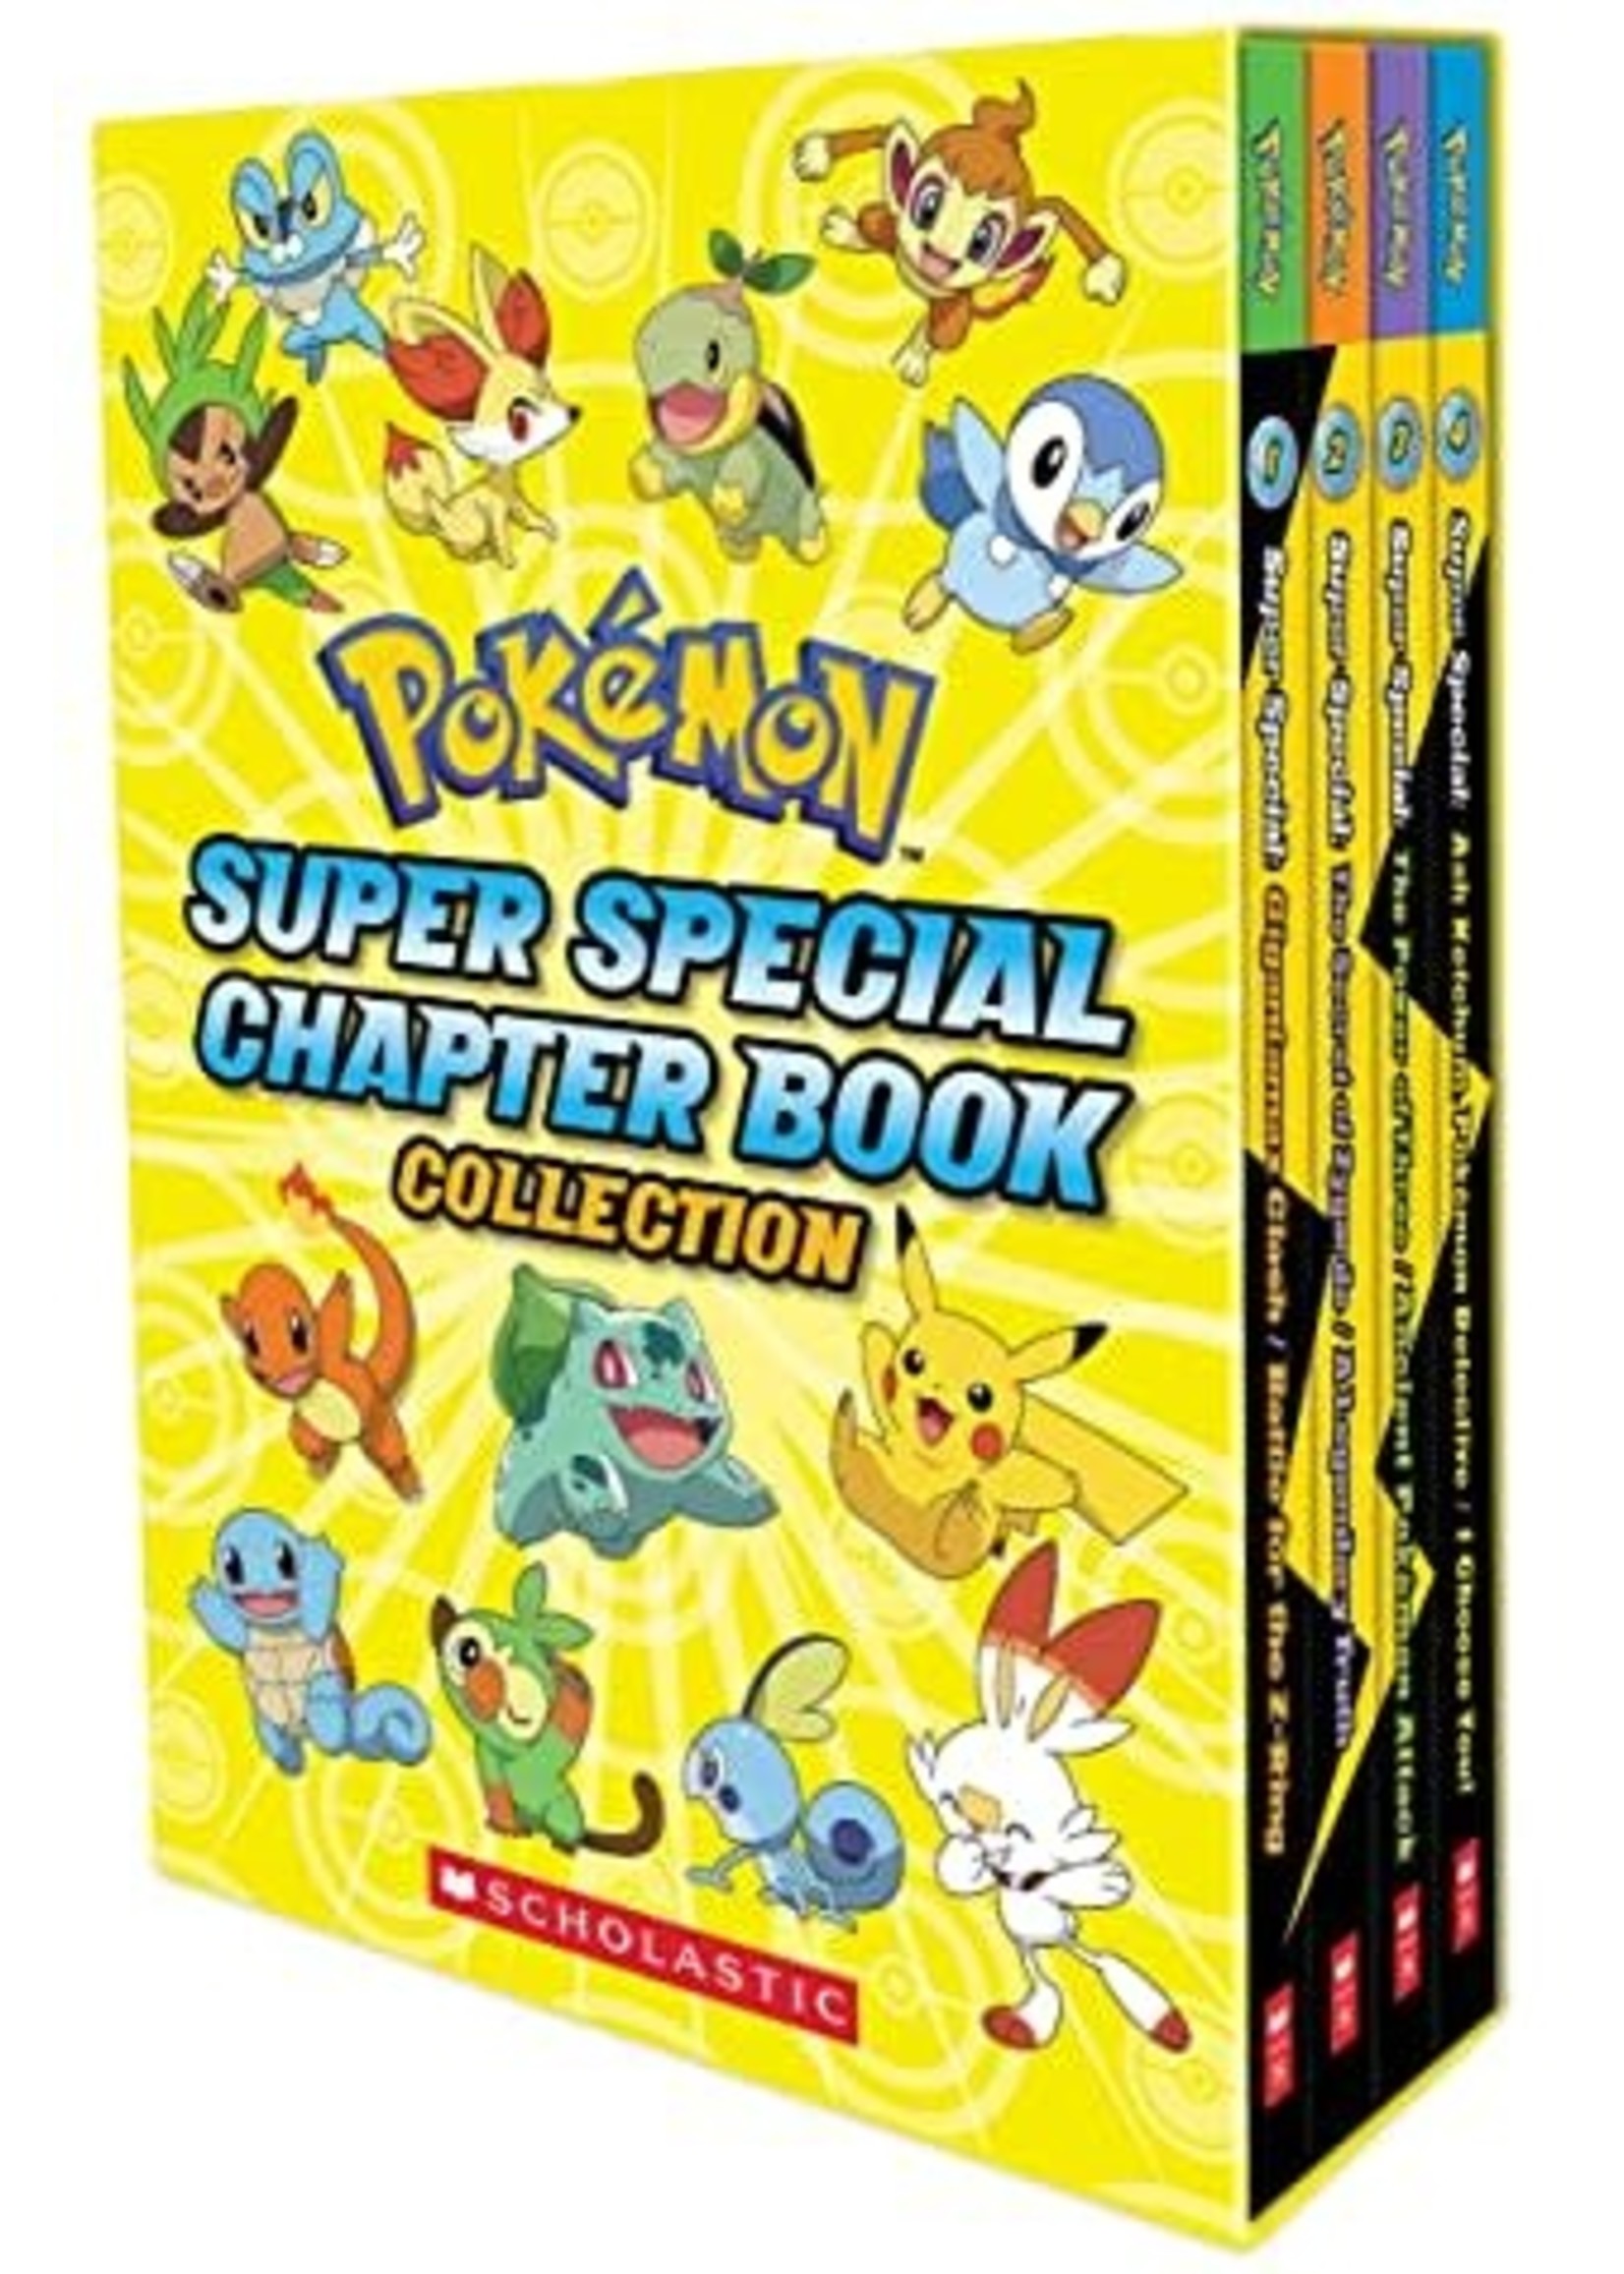 Pokemon Super Special Chapter Book Box Set by Helena Mayer, Jeanette Lane, Maria S. Barbo, R. Shapiro, Tracey West